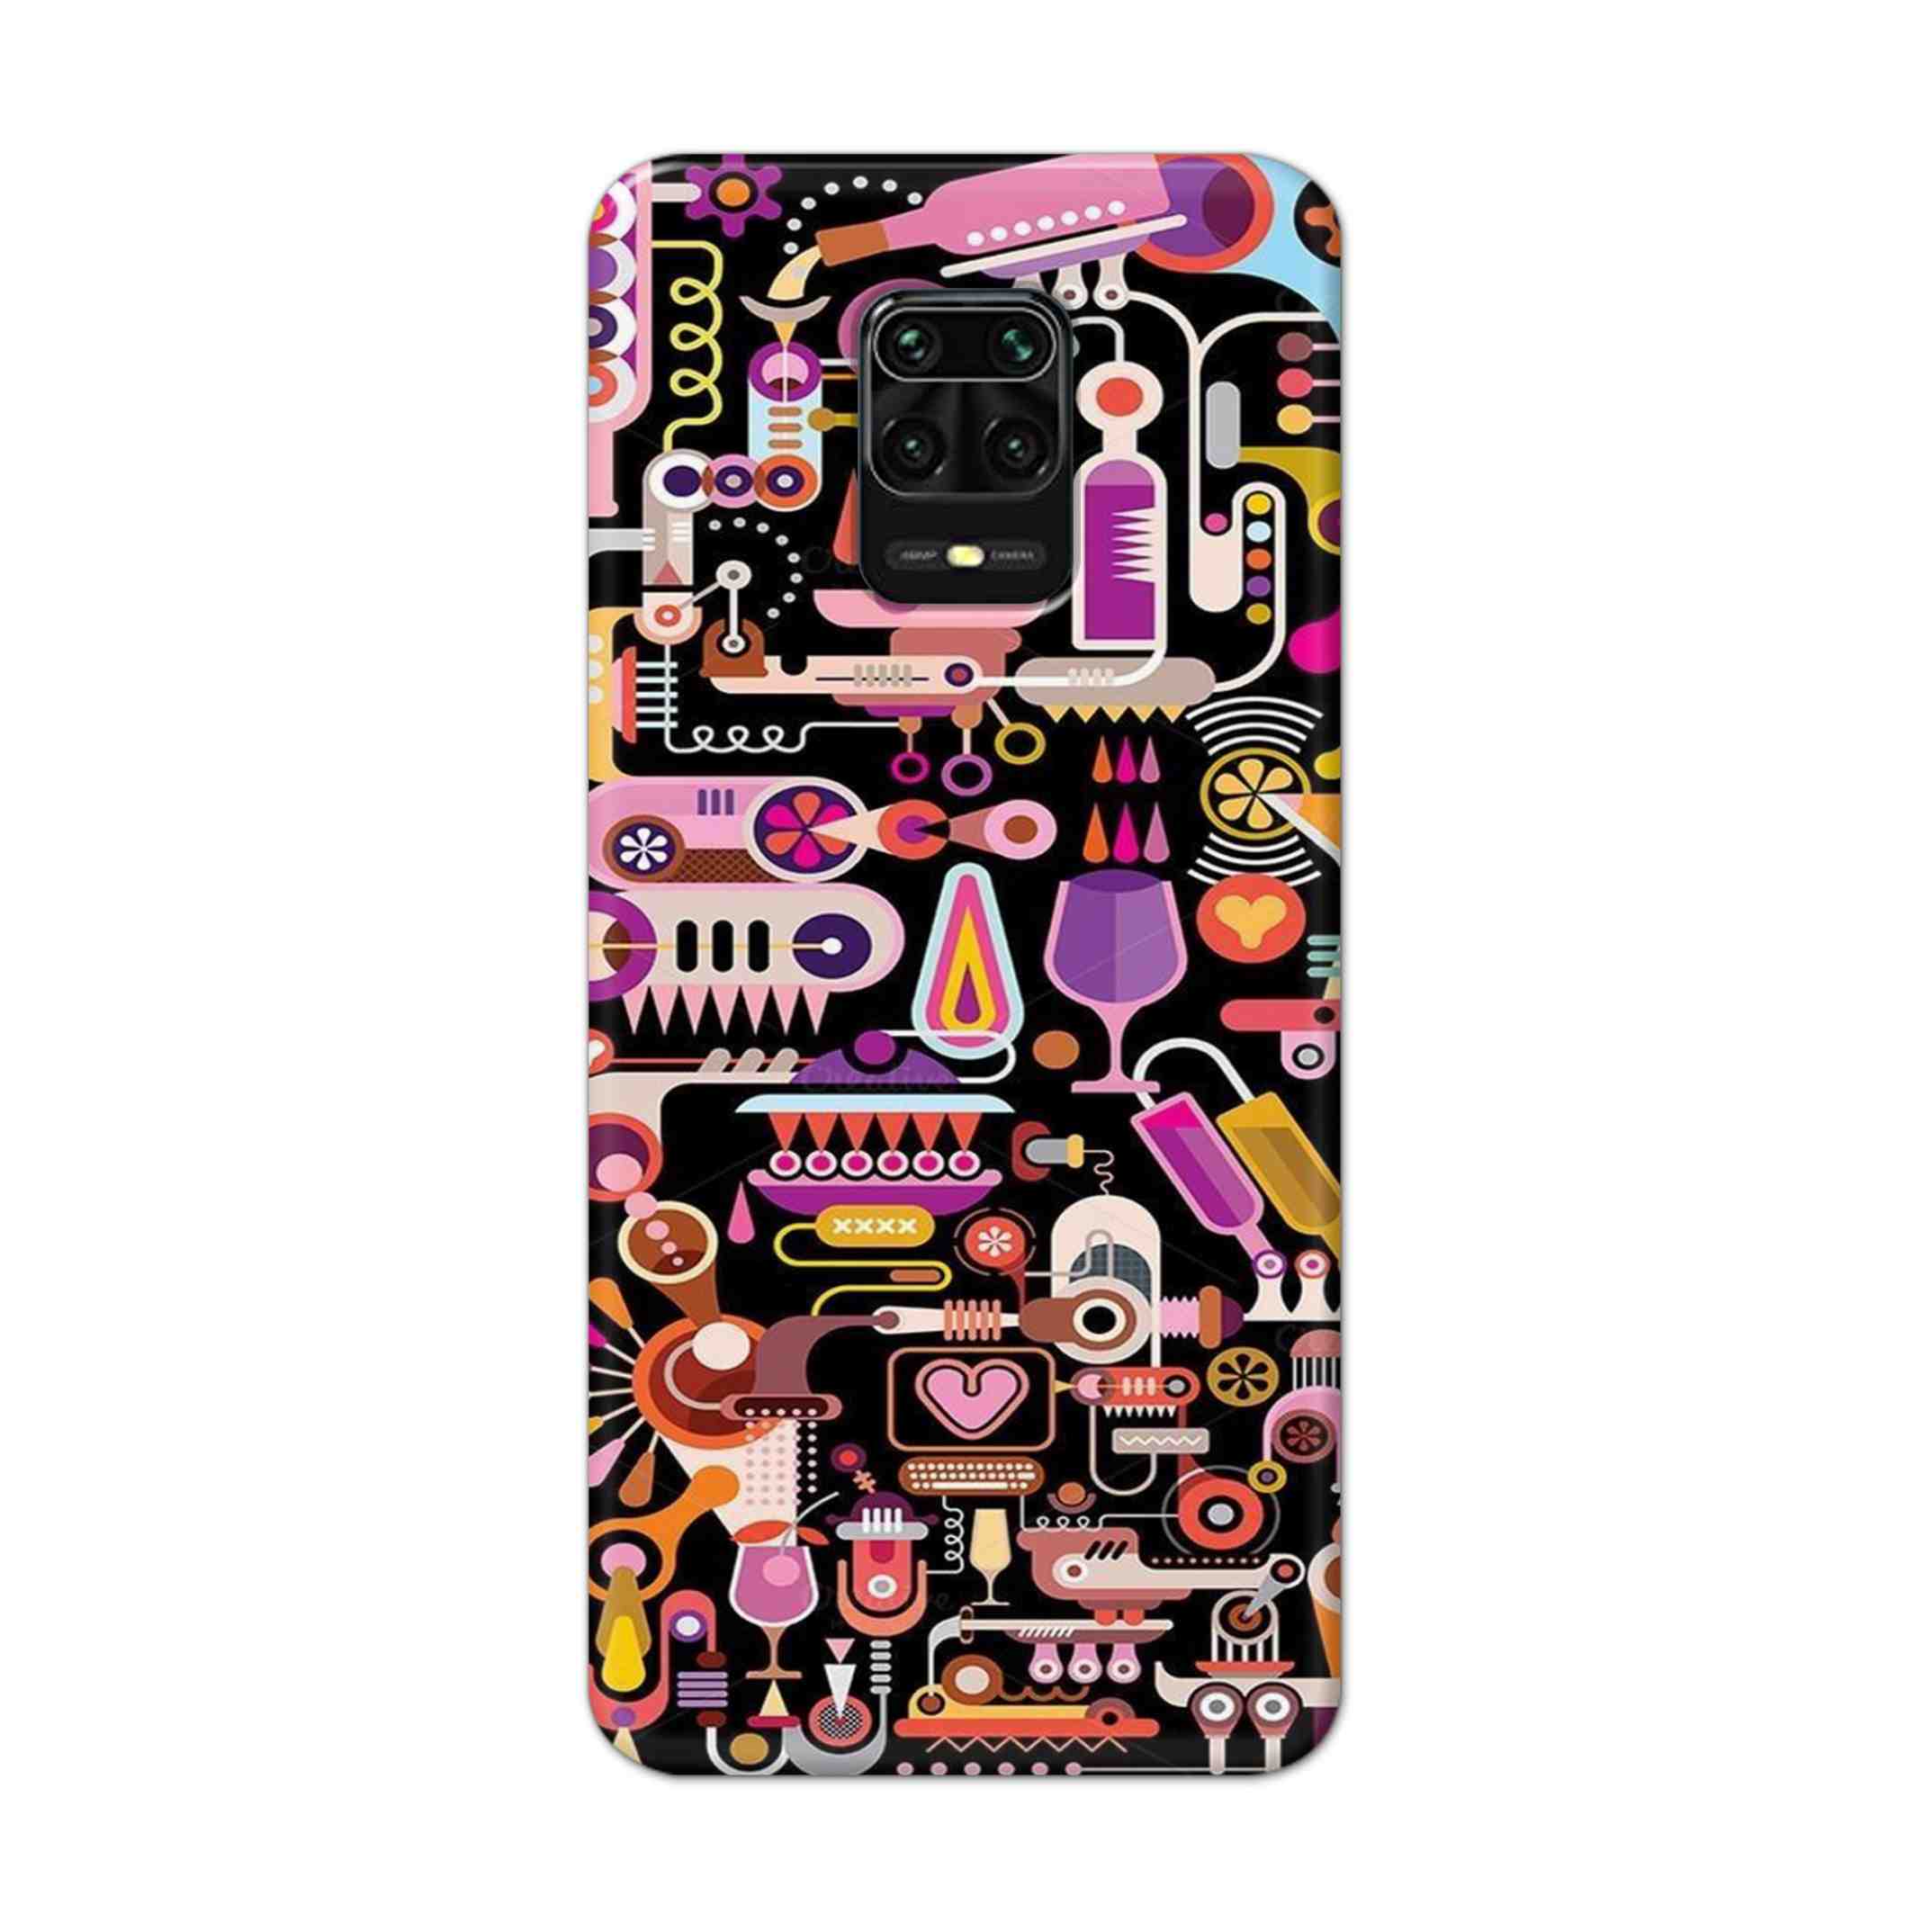 Buy Lab Art Hard Back Mobile Phone Case Cover For Redmi Note 9 Pro Online